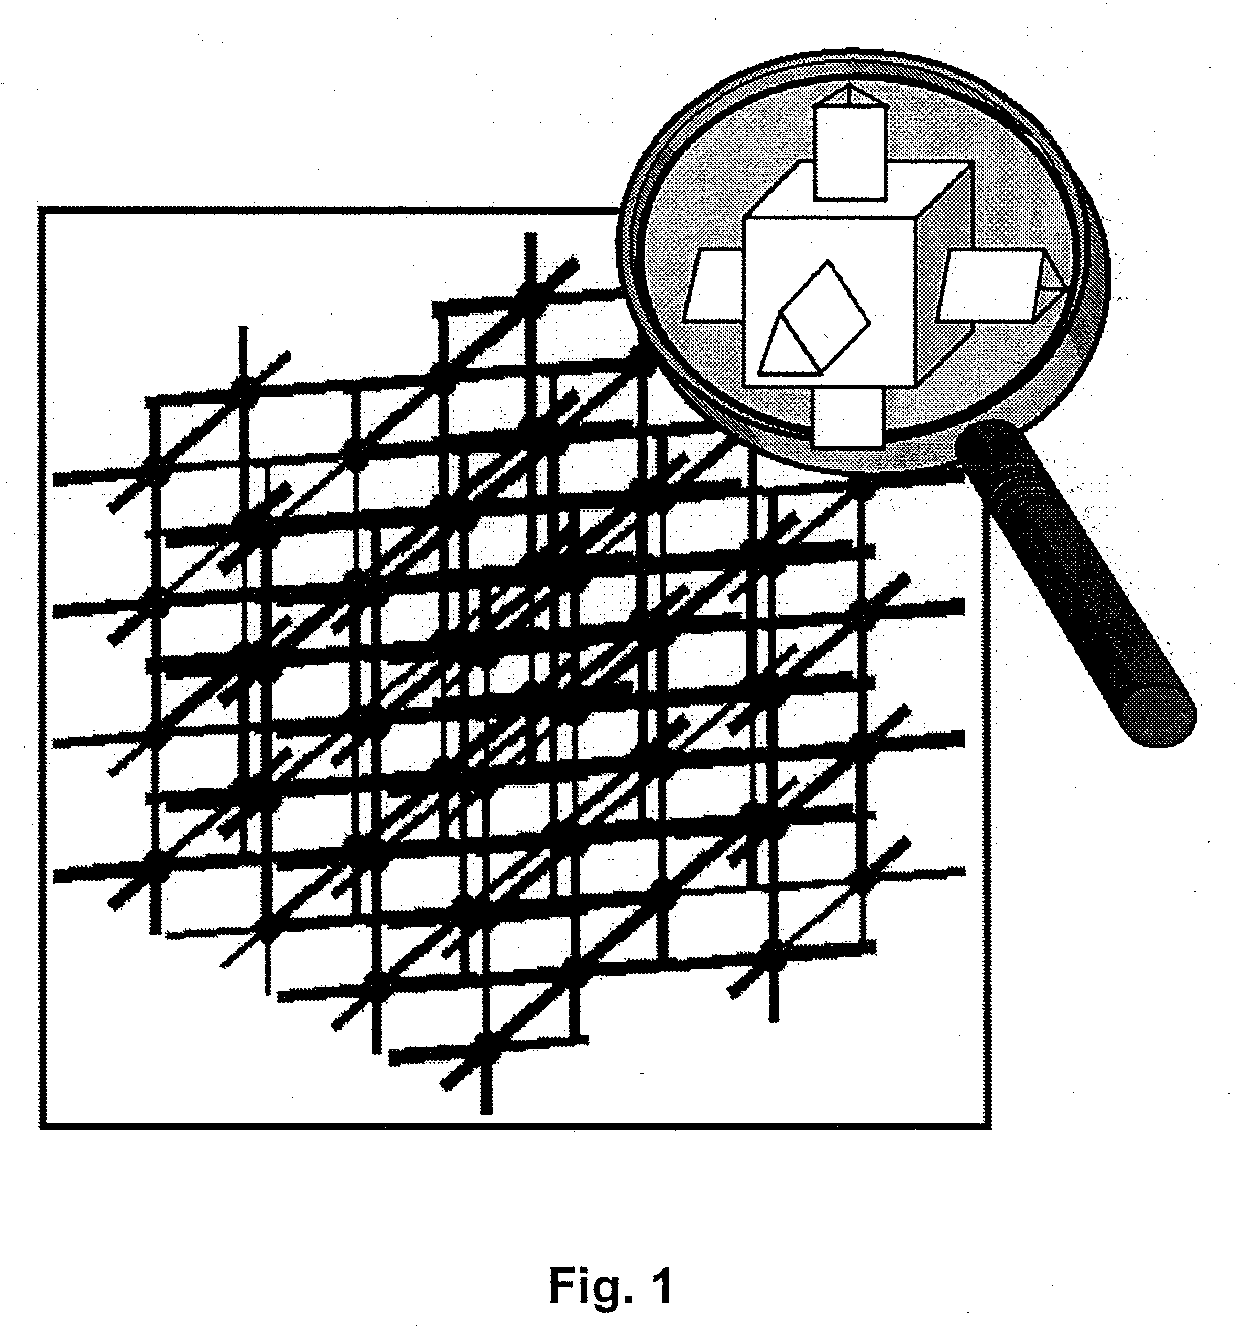 Method of optimizing the injection of a reactive fluid into a porous medium